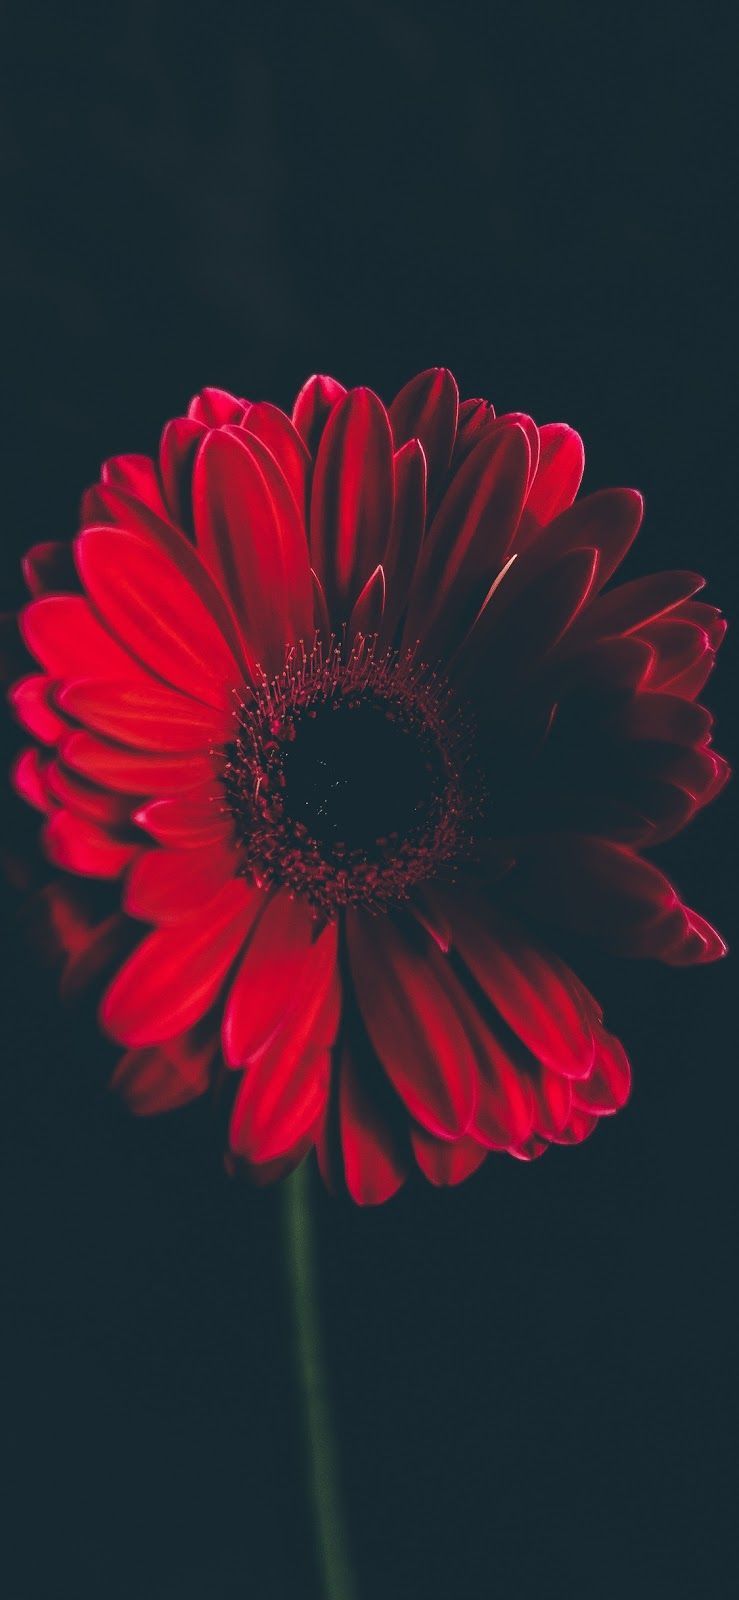 Red Flower (iPhone X) #wallpaper #iphone #android #background #followme. Flower iphone wallpaper, Red flower wallpaper, iPhone background red